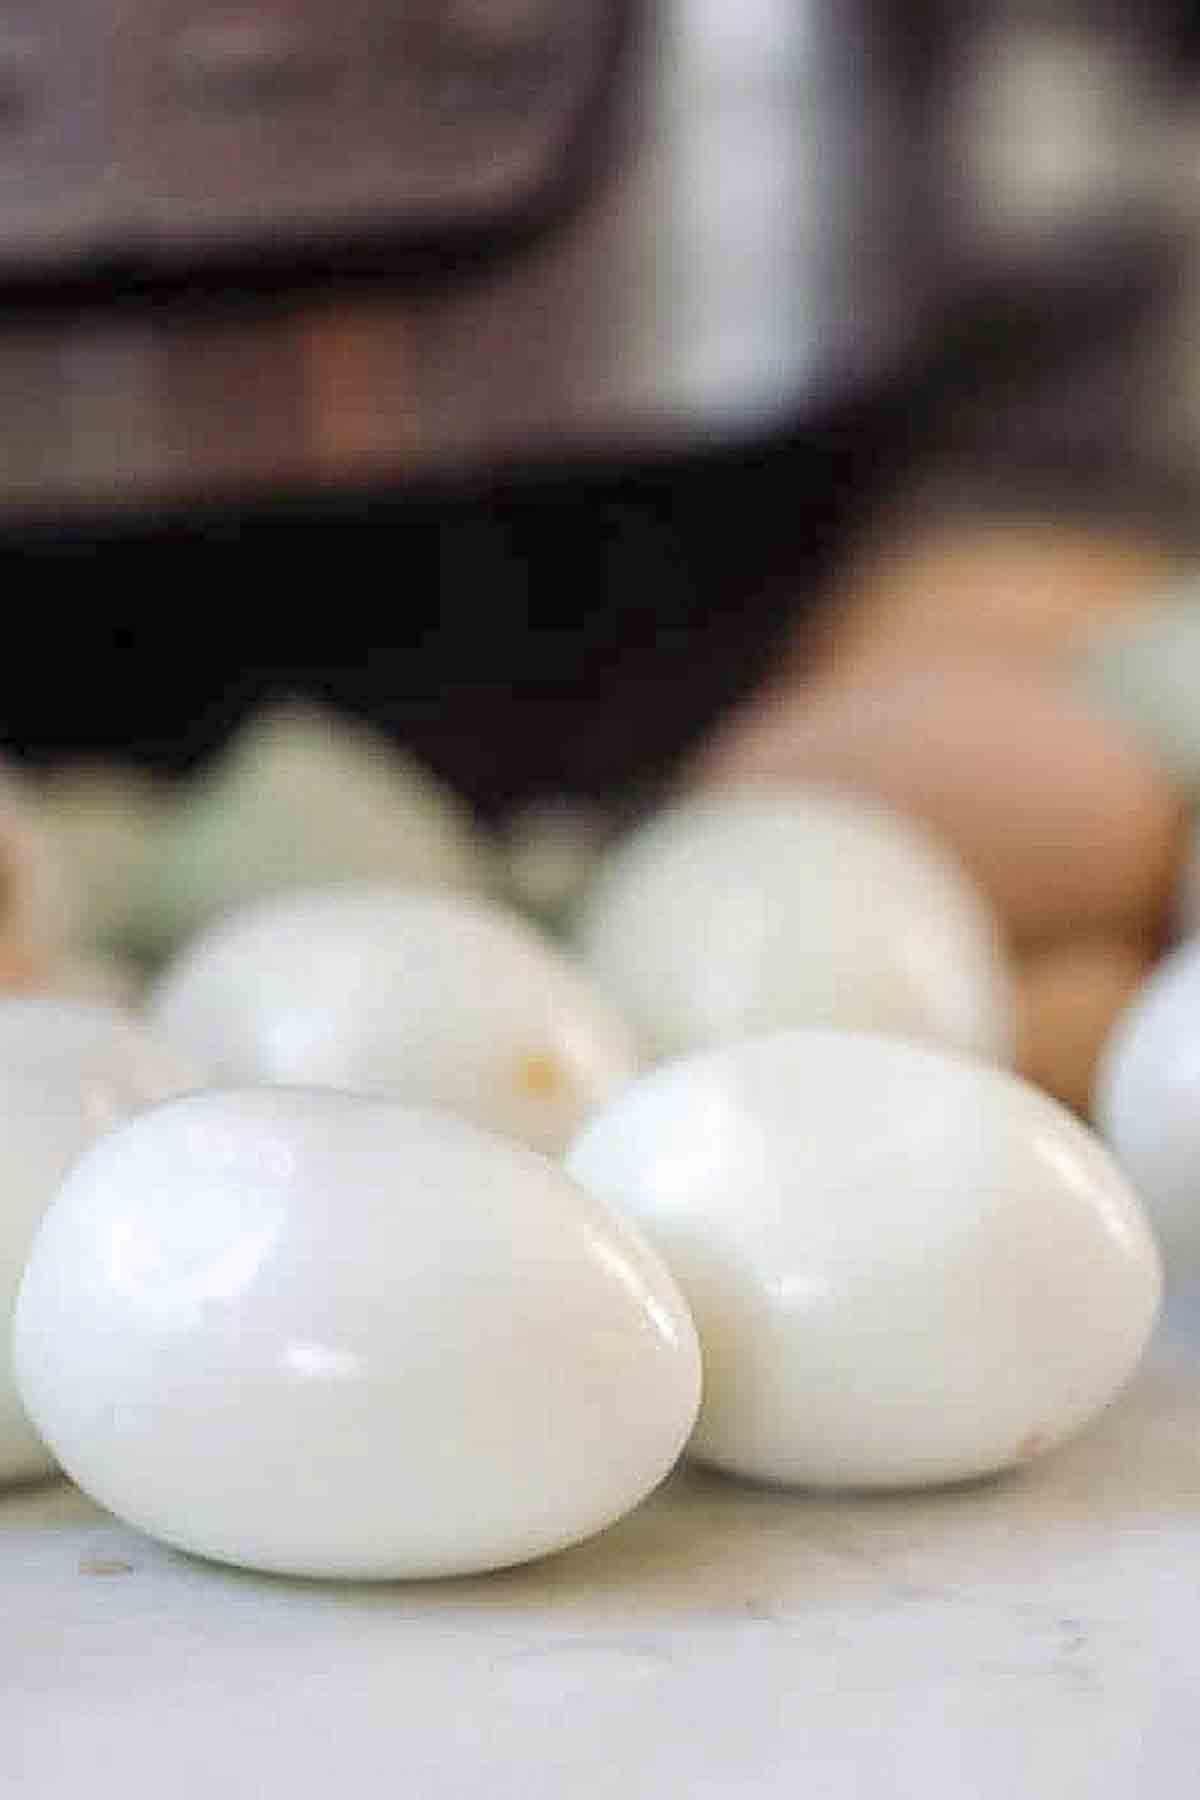 Hard-boiled eggs on a countertop with an Instant Pot in the background